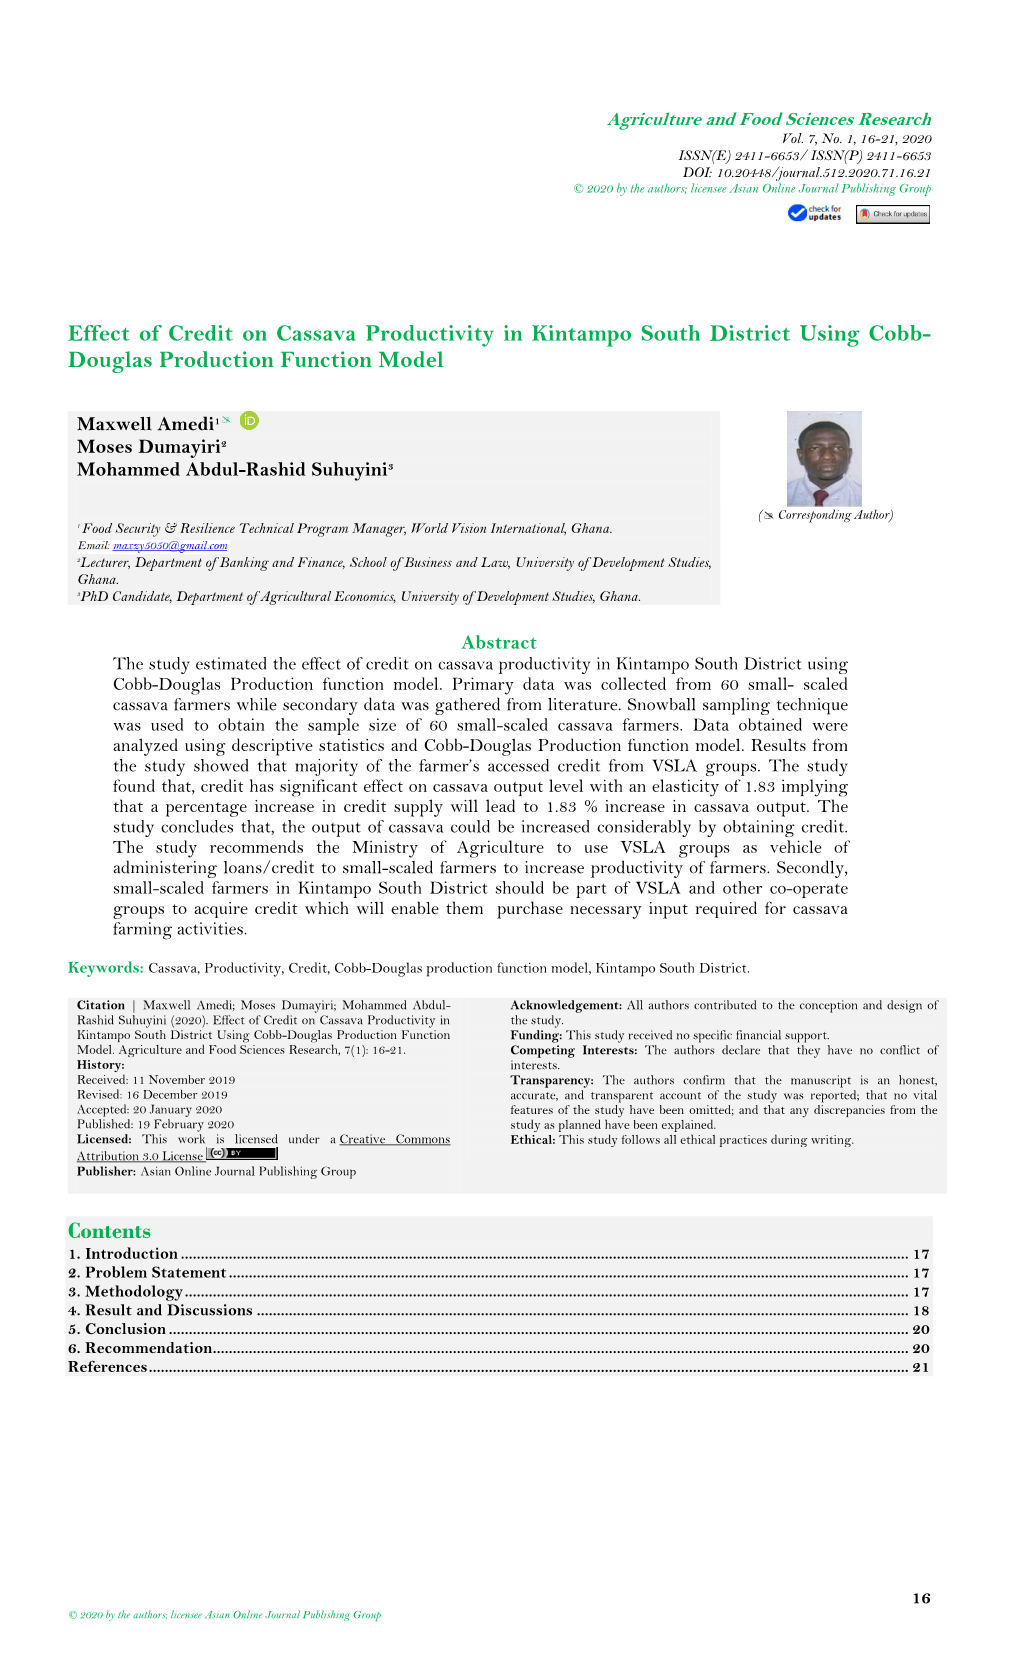 Effect of Credit on Cassava Productivity in Kintampo South District Using Cobb- Douglas Production Function Model